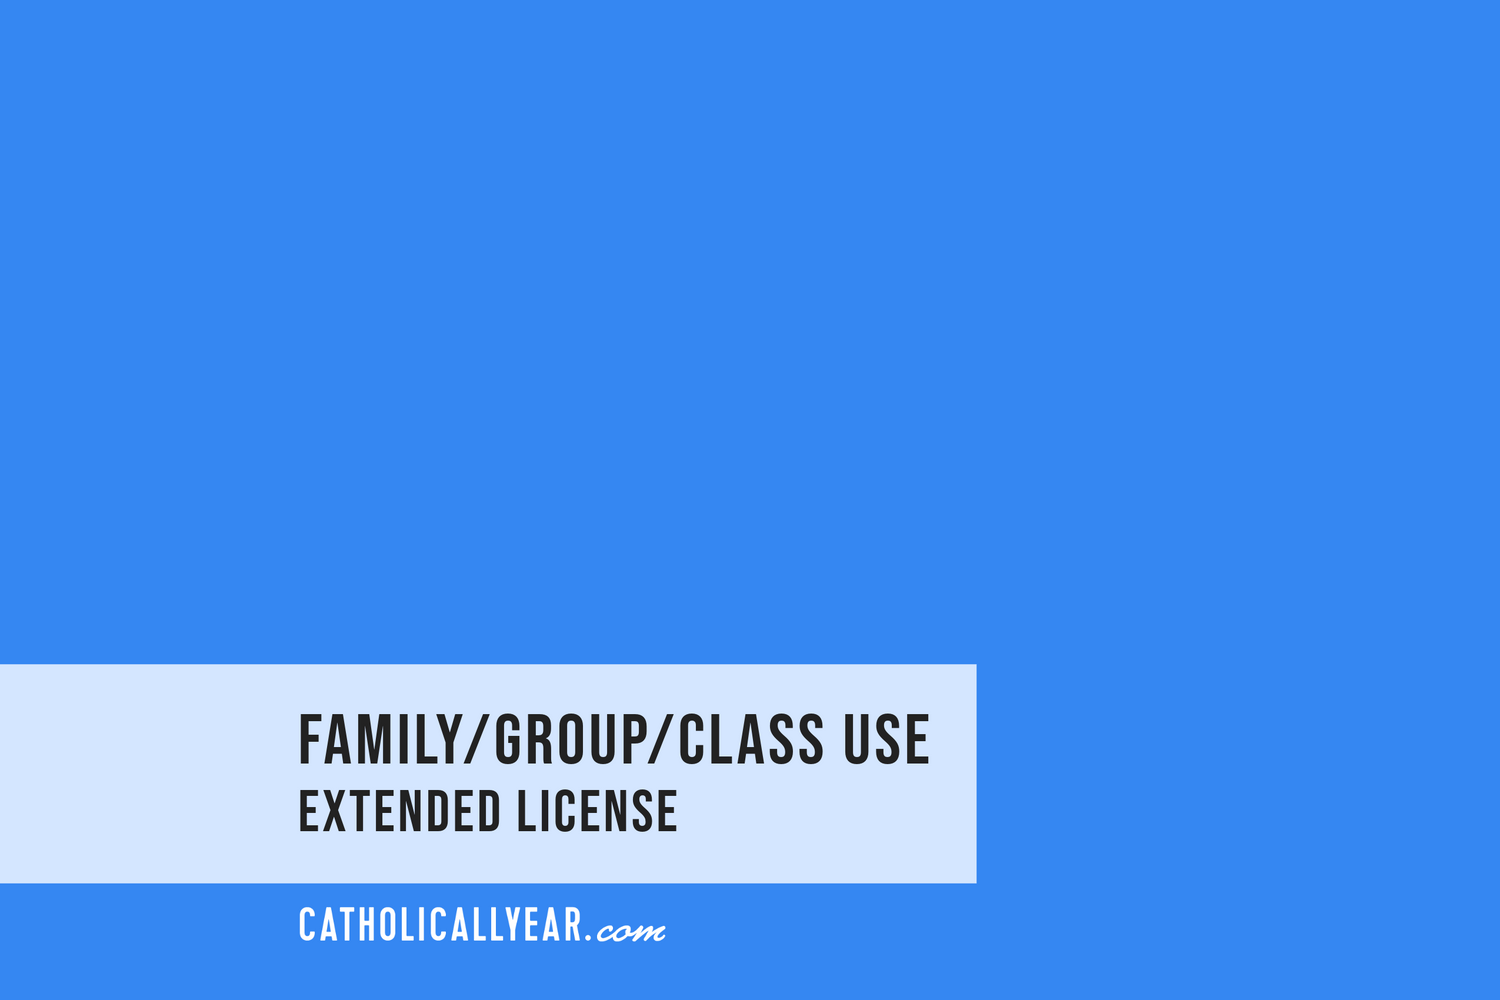 Extended License for Family/Group/Class Use